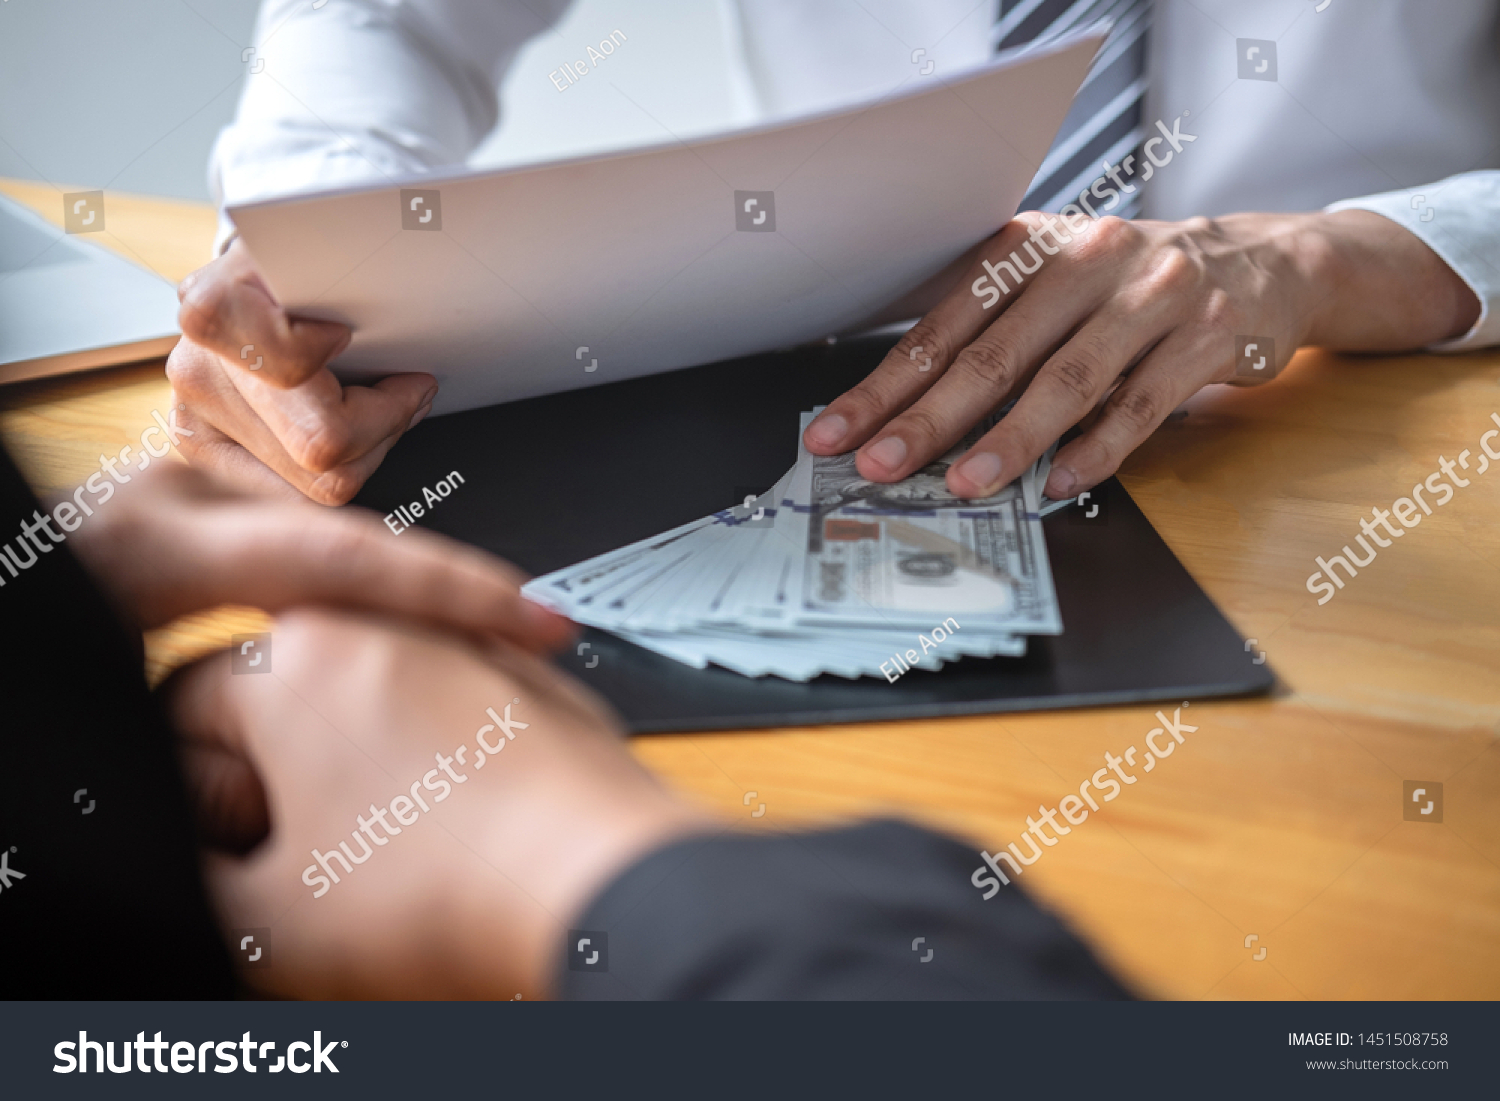 Dishonest cheating in business illegal money, Businessman giving bribe money in business people to give success the deal contract of investment, Bribery and corruption concept. #1451508758